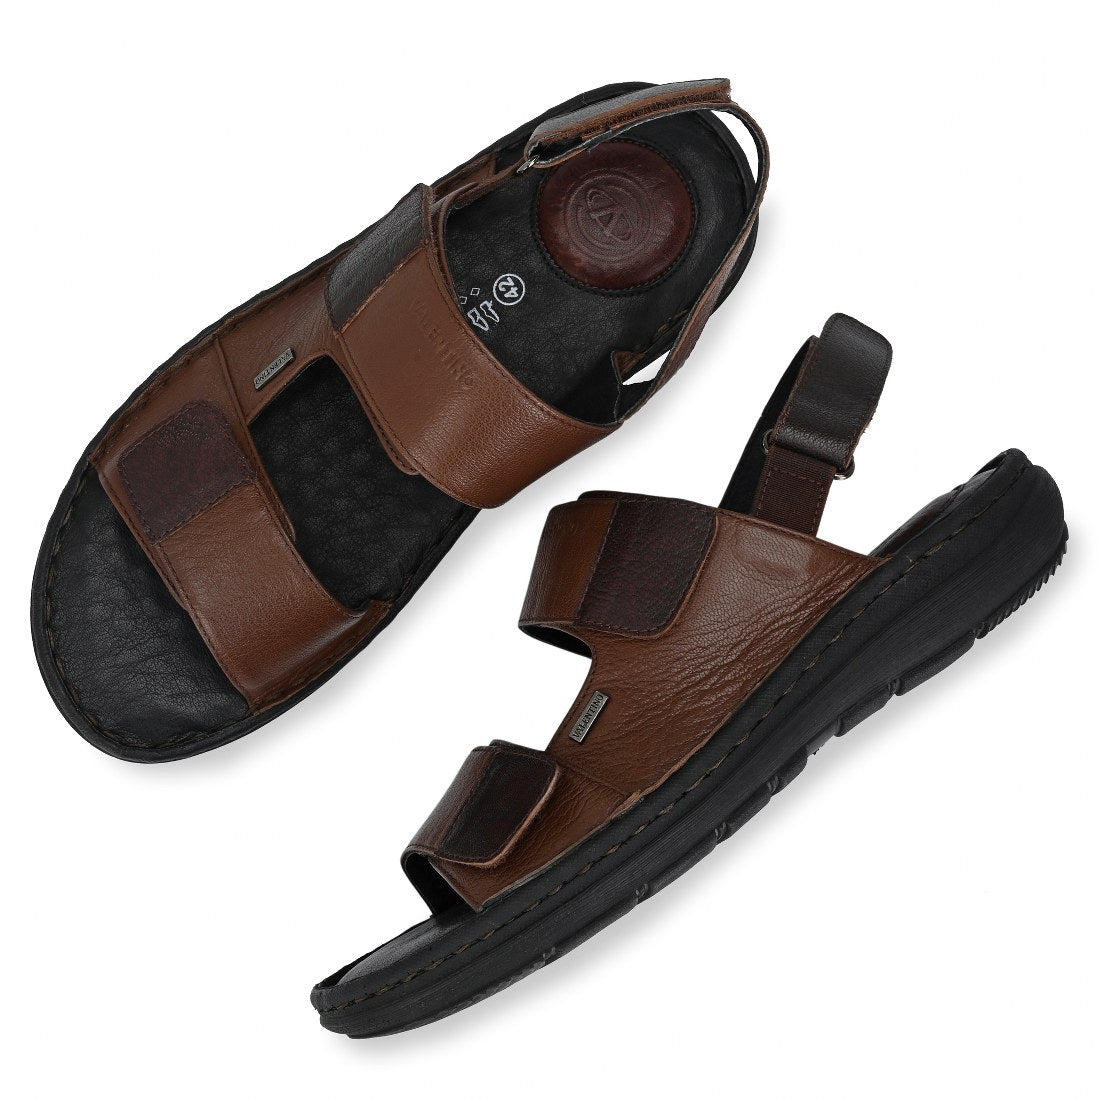 CHALLENGE-66 MEN LEATHER MOCCA/CHERRY CASUAL SANDAL